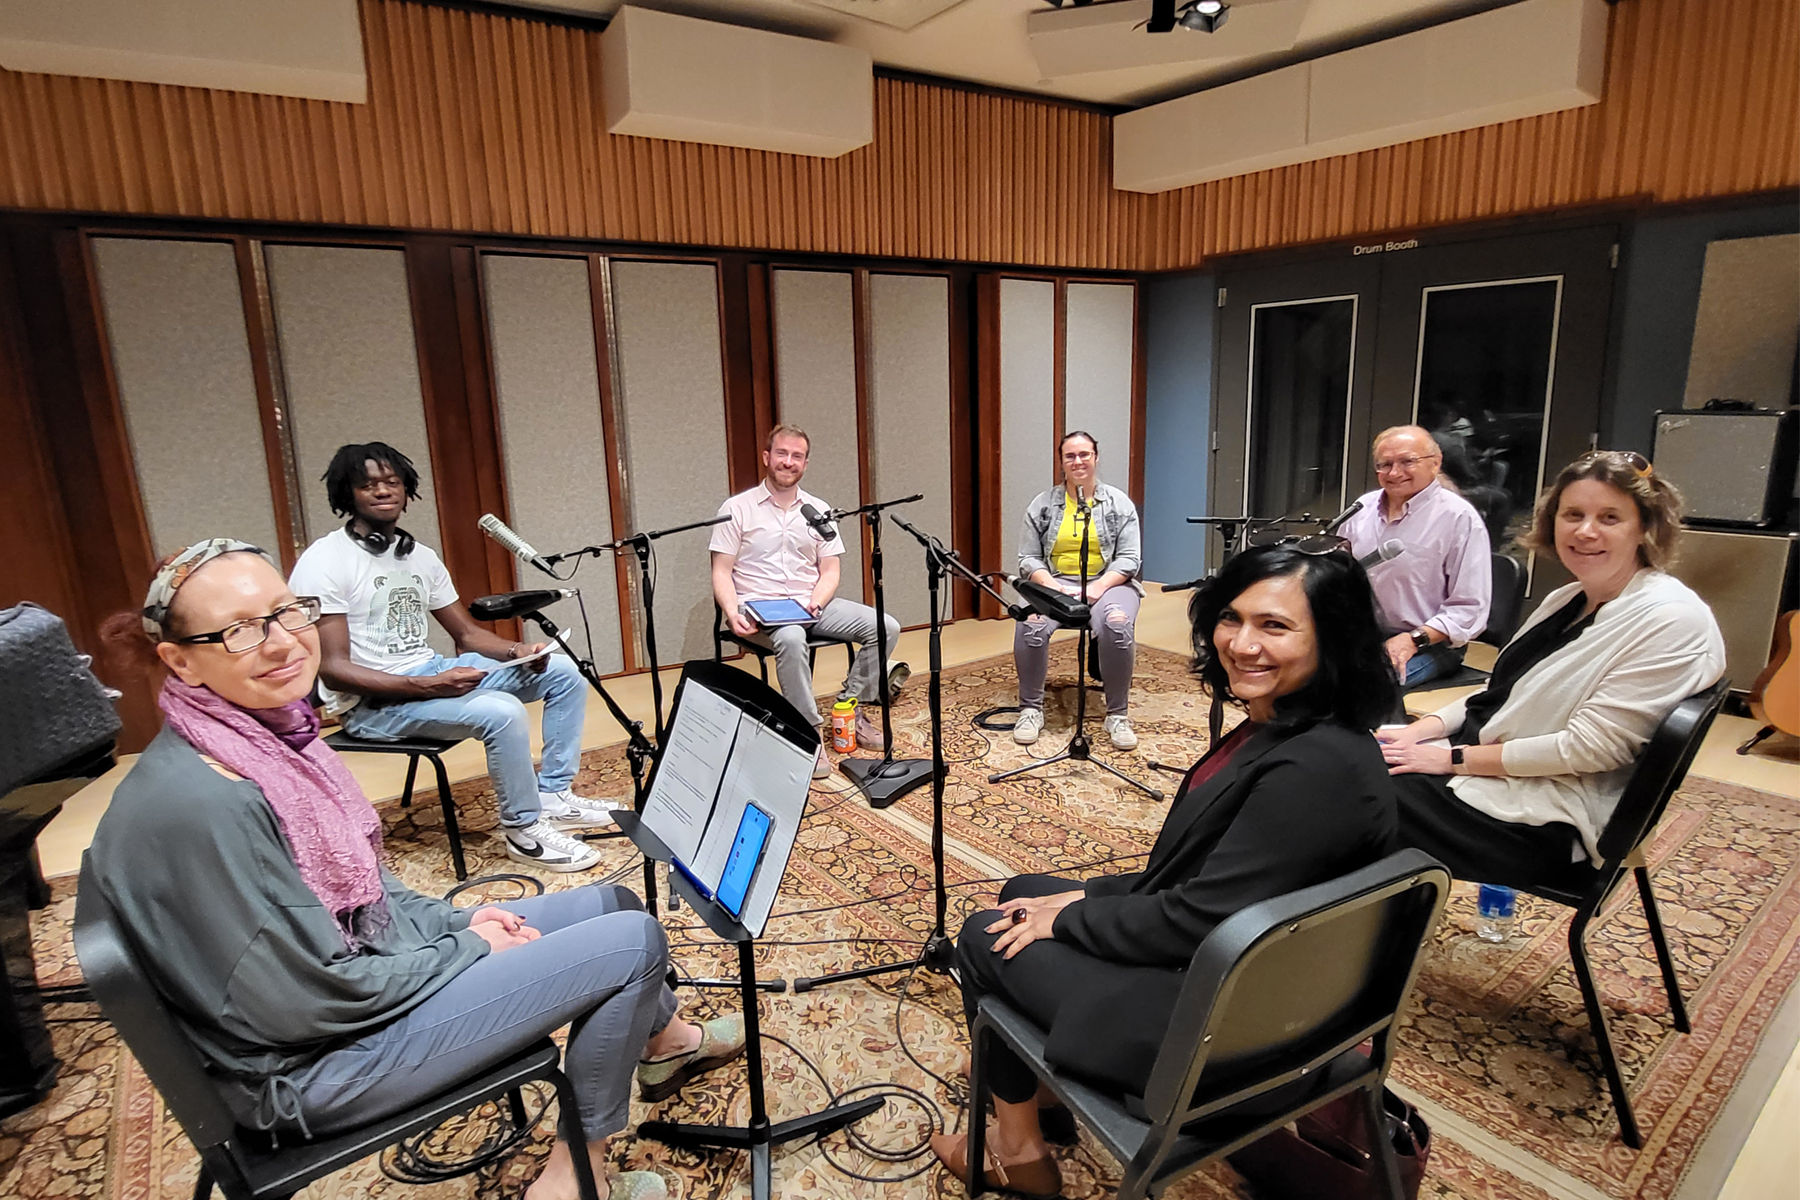 Podcast participants sitting in recording studio near microphones